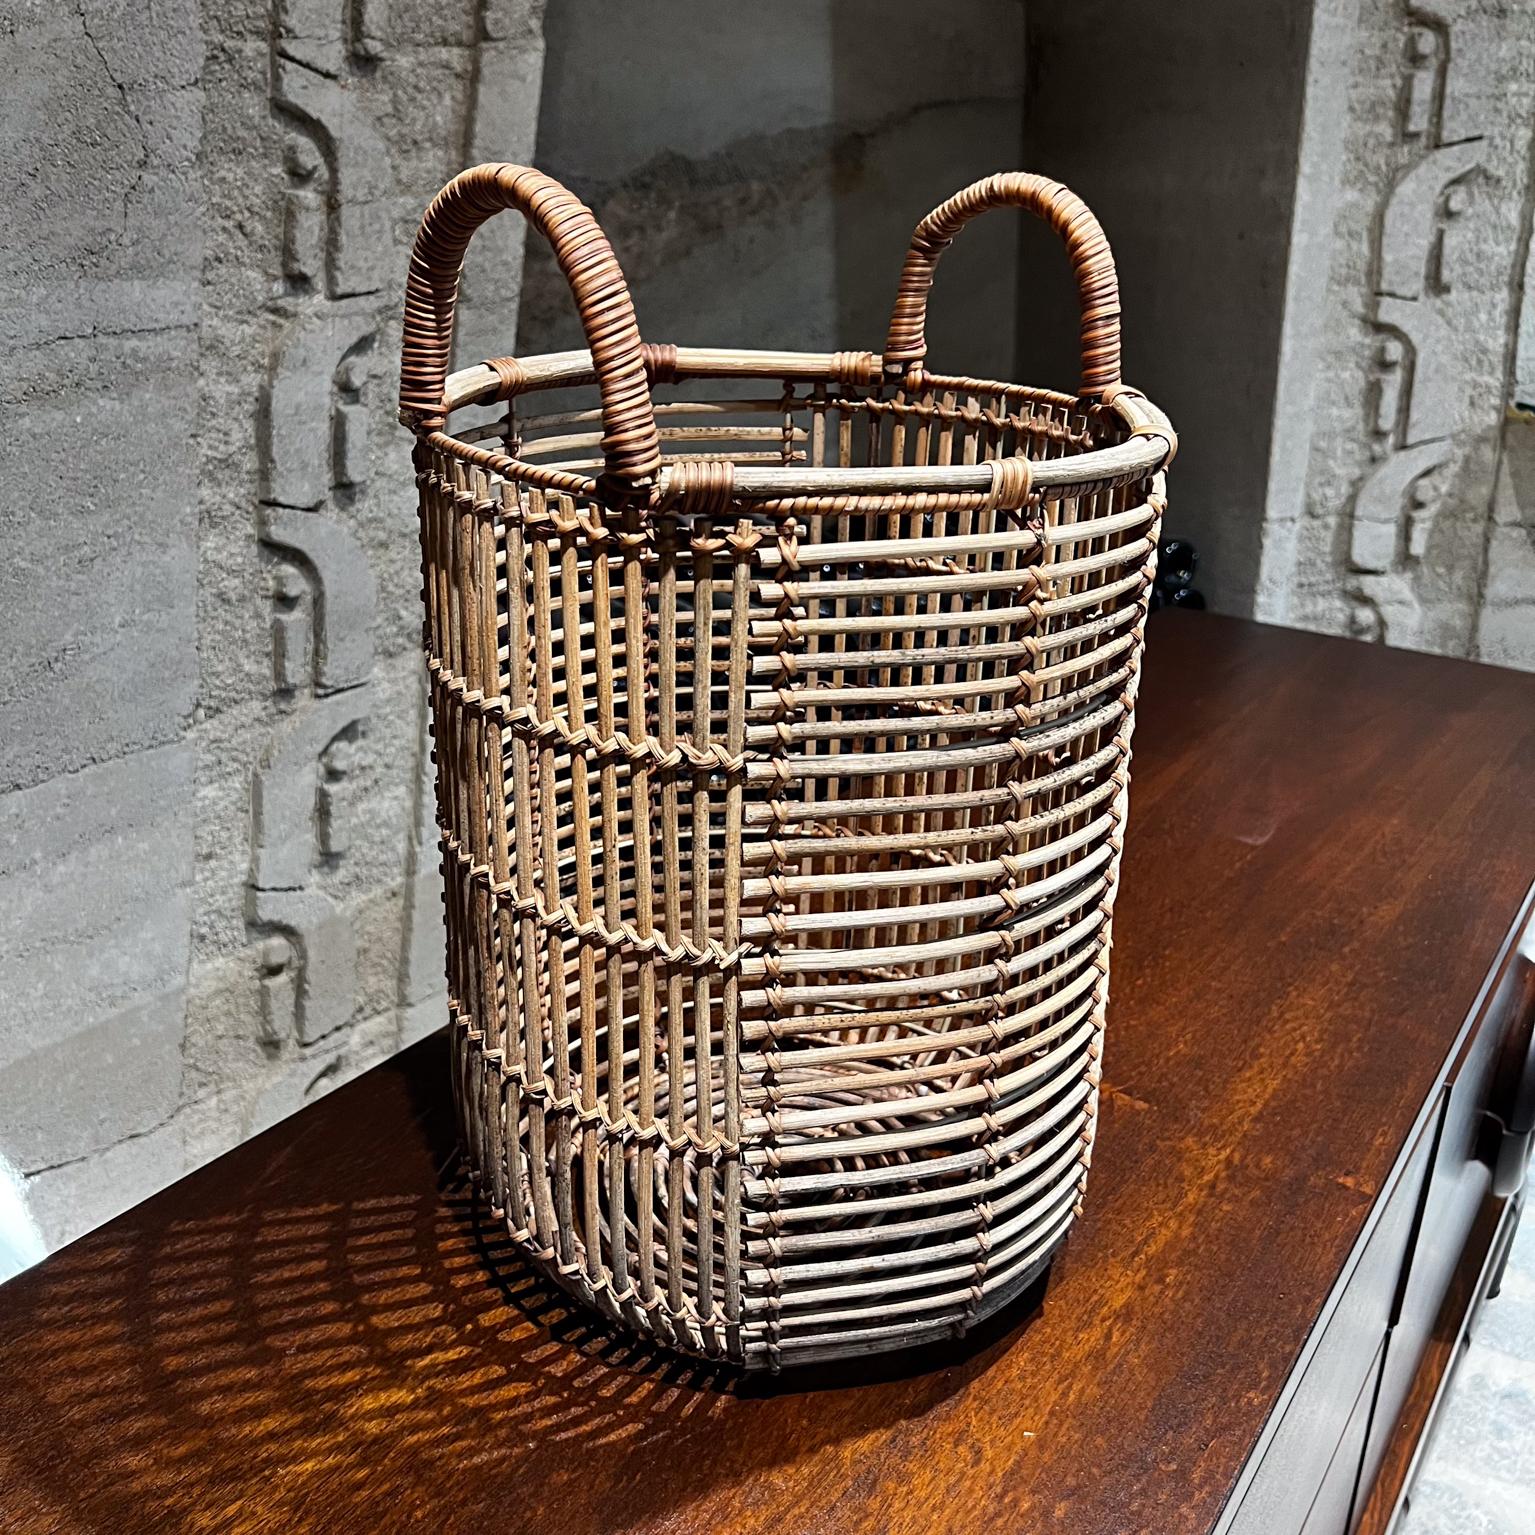 1960s Vintage Woven Basket Planter Catch-All Carry Handle
18.25 to top of handle, top of basket 15 tall, outside diameter 11.75 inside diameter 11 inches.
Unrestored original preowned vintage condition. Wear visible.
Review all images.